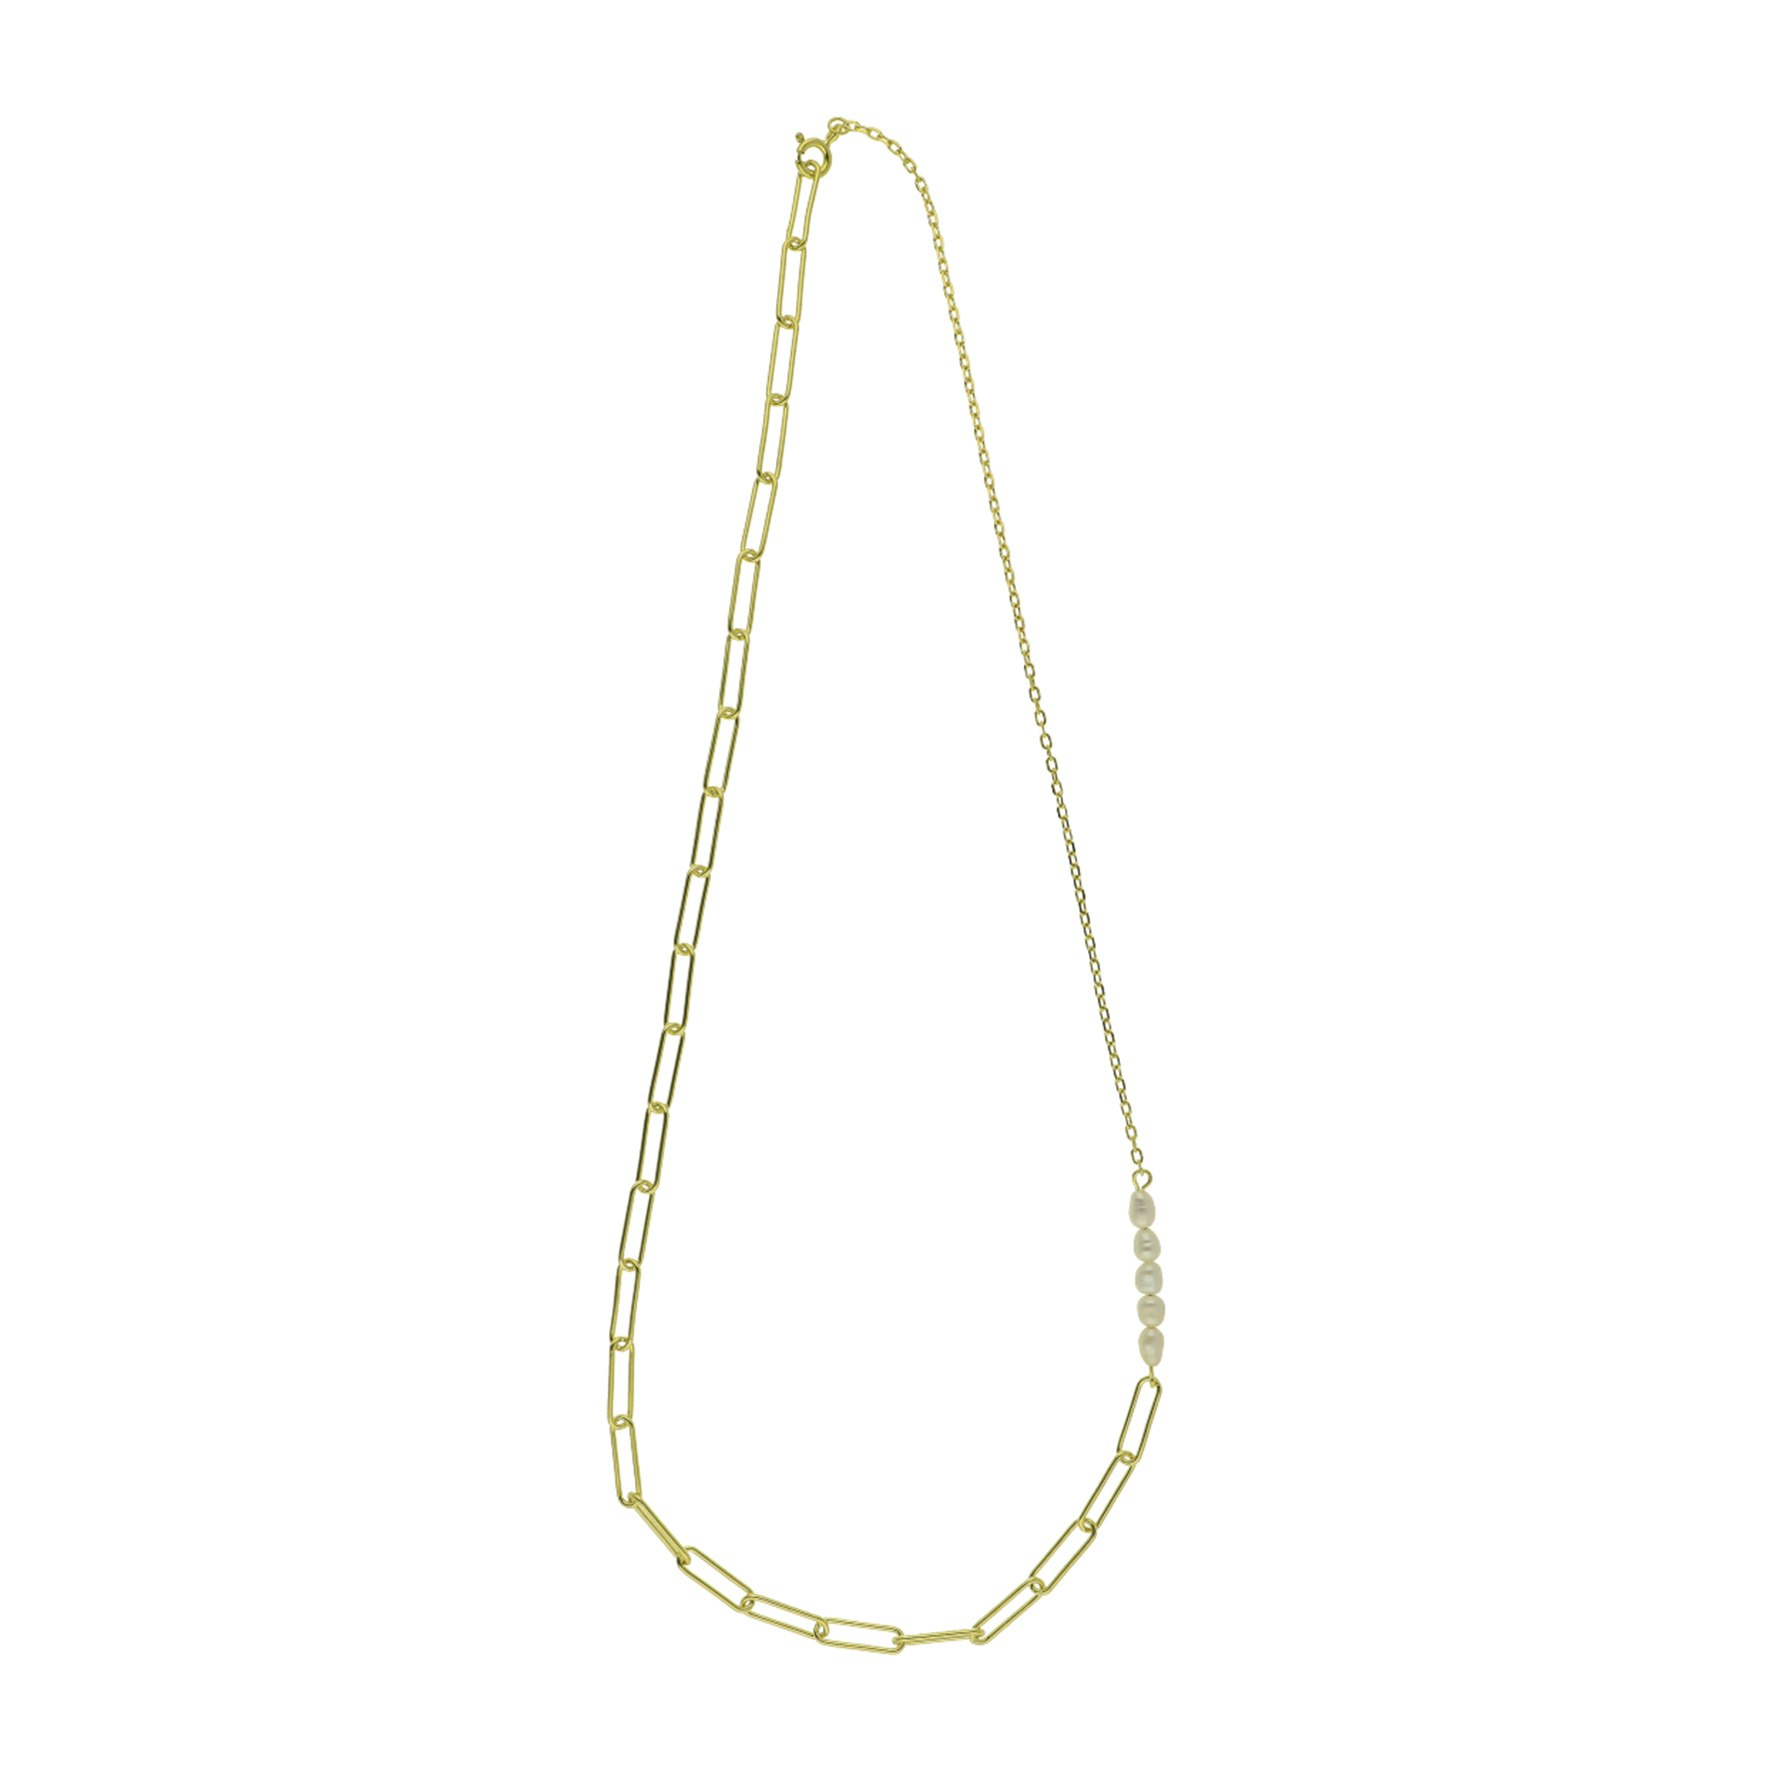 Dicte Pearl Necklace from Nuni Copenhagen in Goldplated Silver Sterling 925